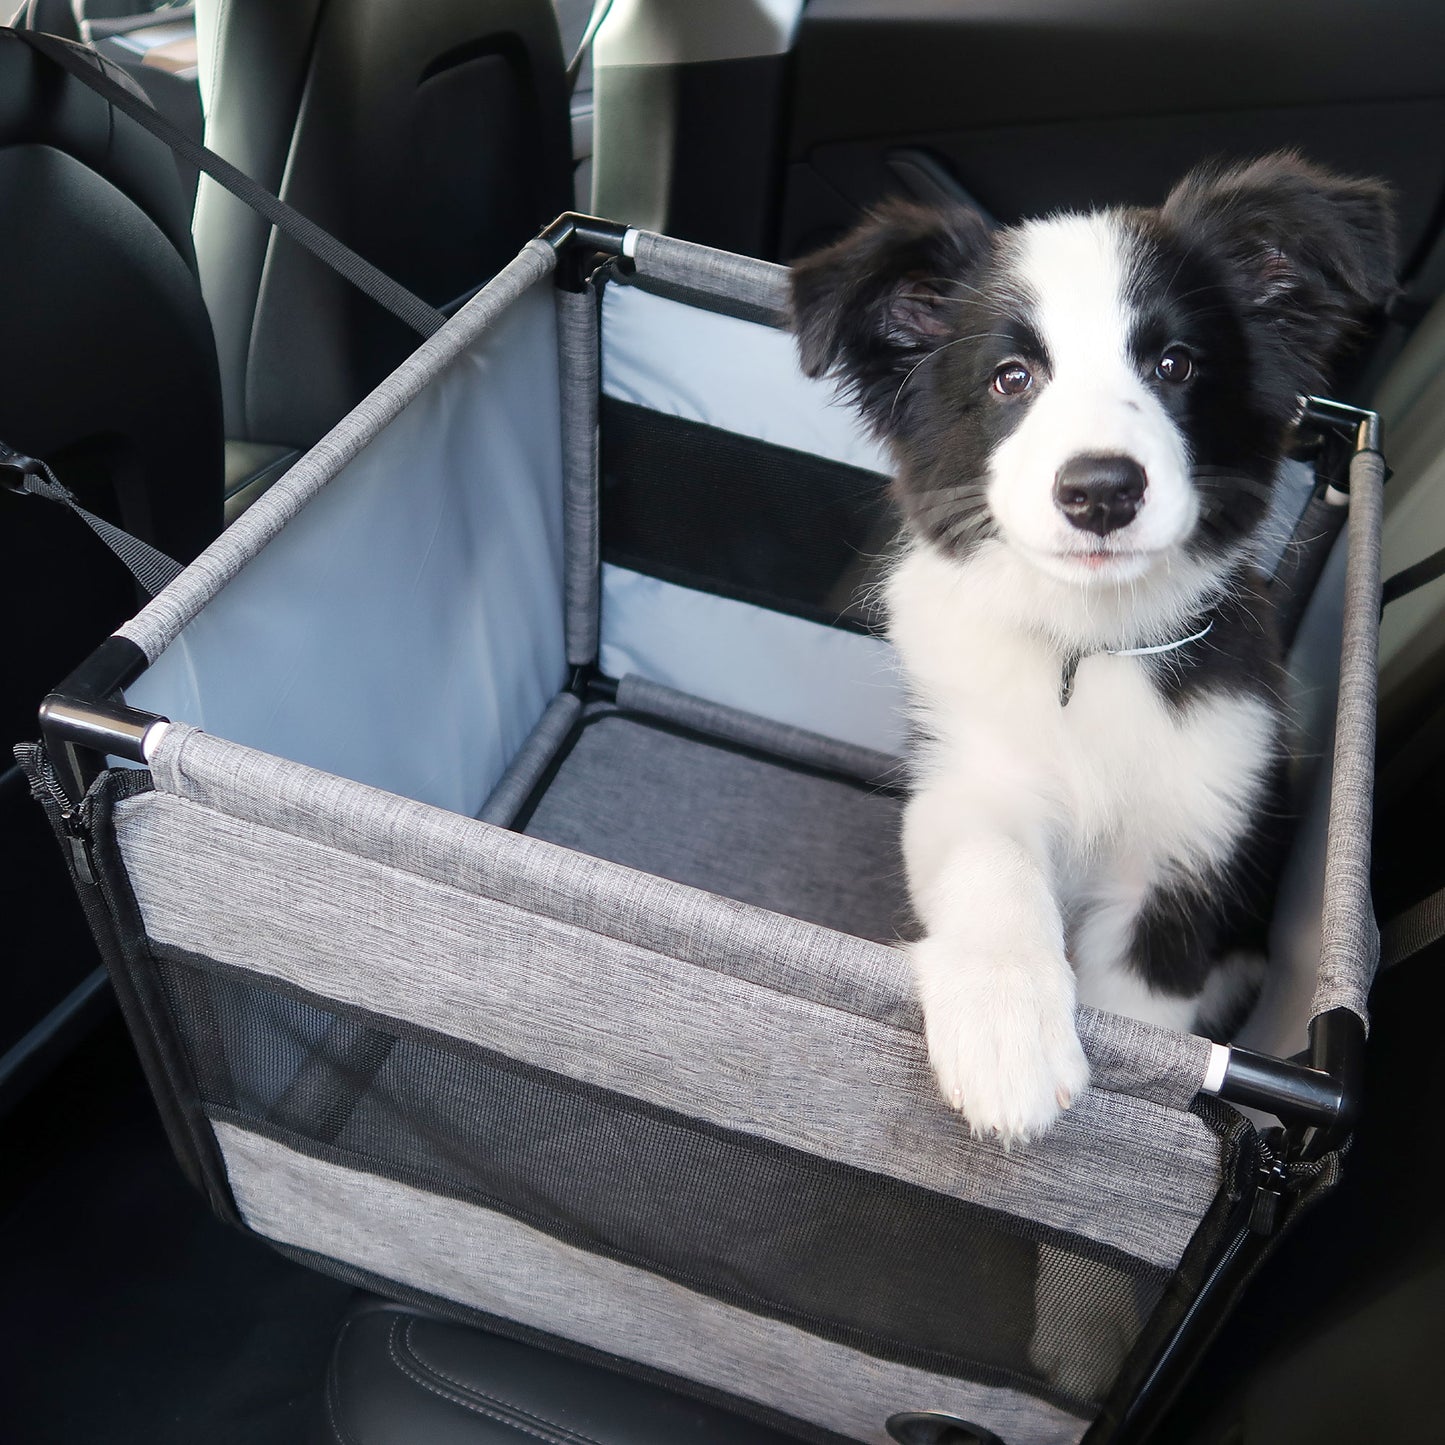 Car Pet Seat Stable Carriers Dog Accessories Safe Portable Puppy Travel Baskets Mesh Protector Waterproof Outdoor Pet Supplies